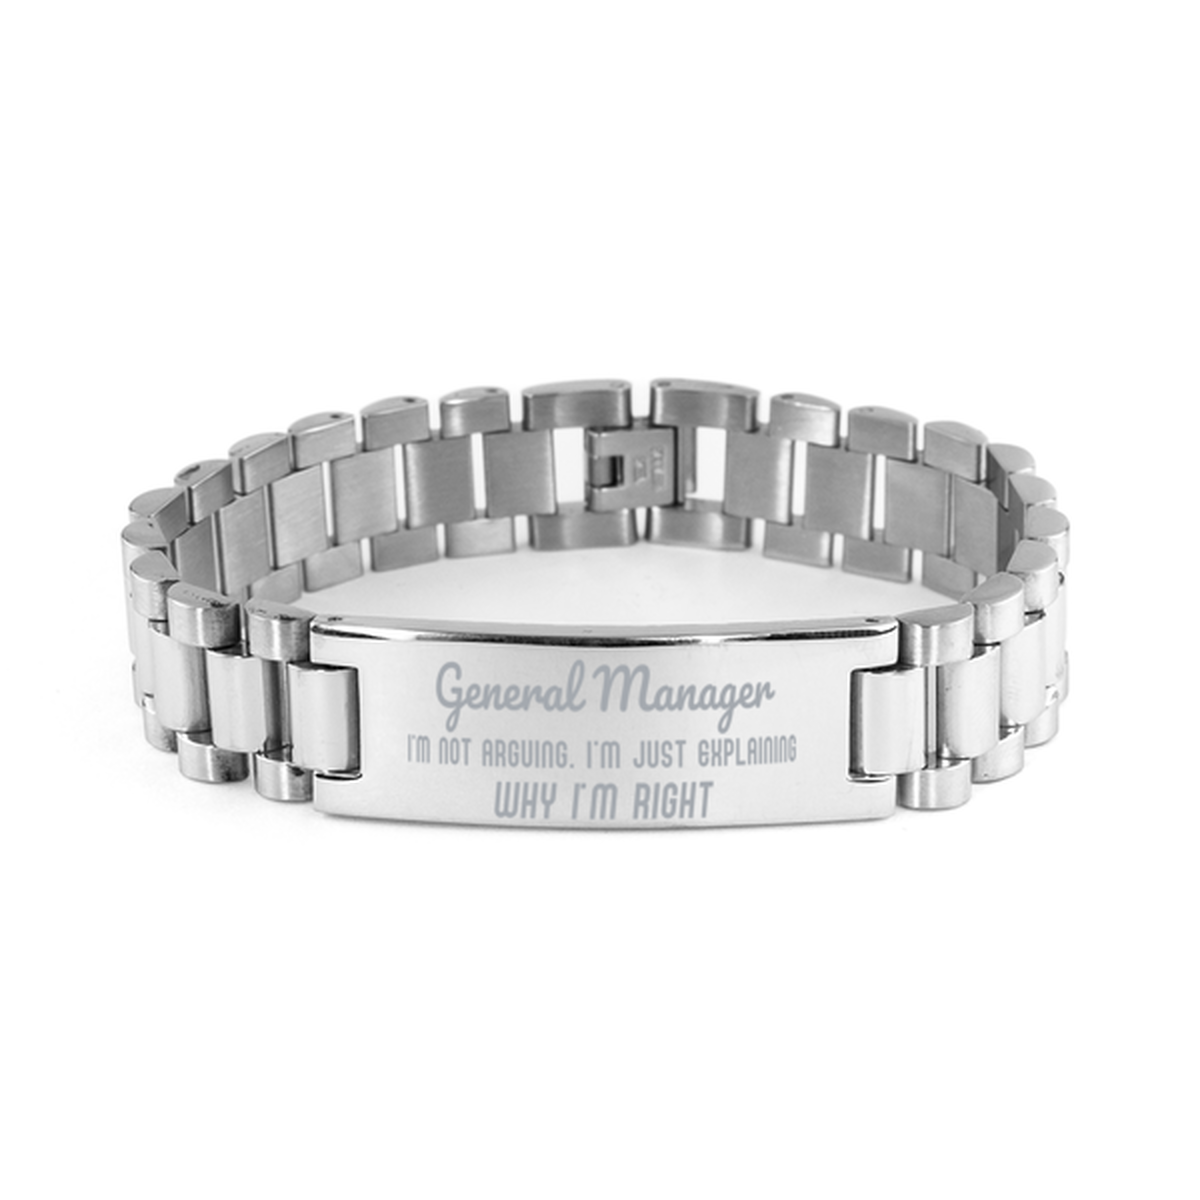 General Manager I'm not Arguing. I'm Just Explaining Why I'm RIGHT Ladder Stainless Steel Bracelet, Graduation Birthday Christmas General Manager Gifts For General Manager Funny Saying Quote Present for Men Women Coworker